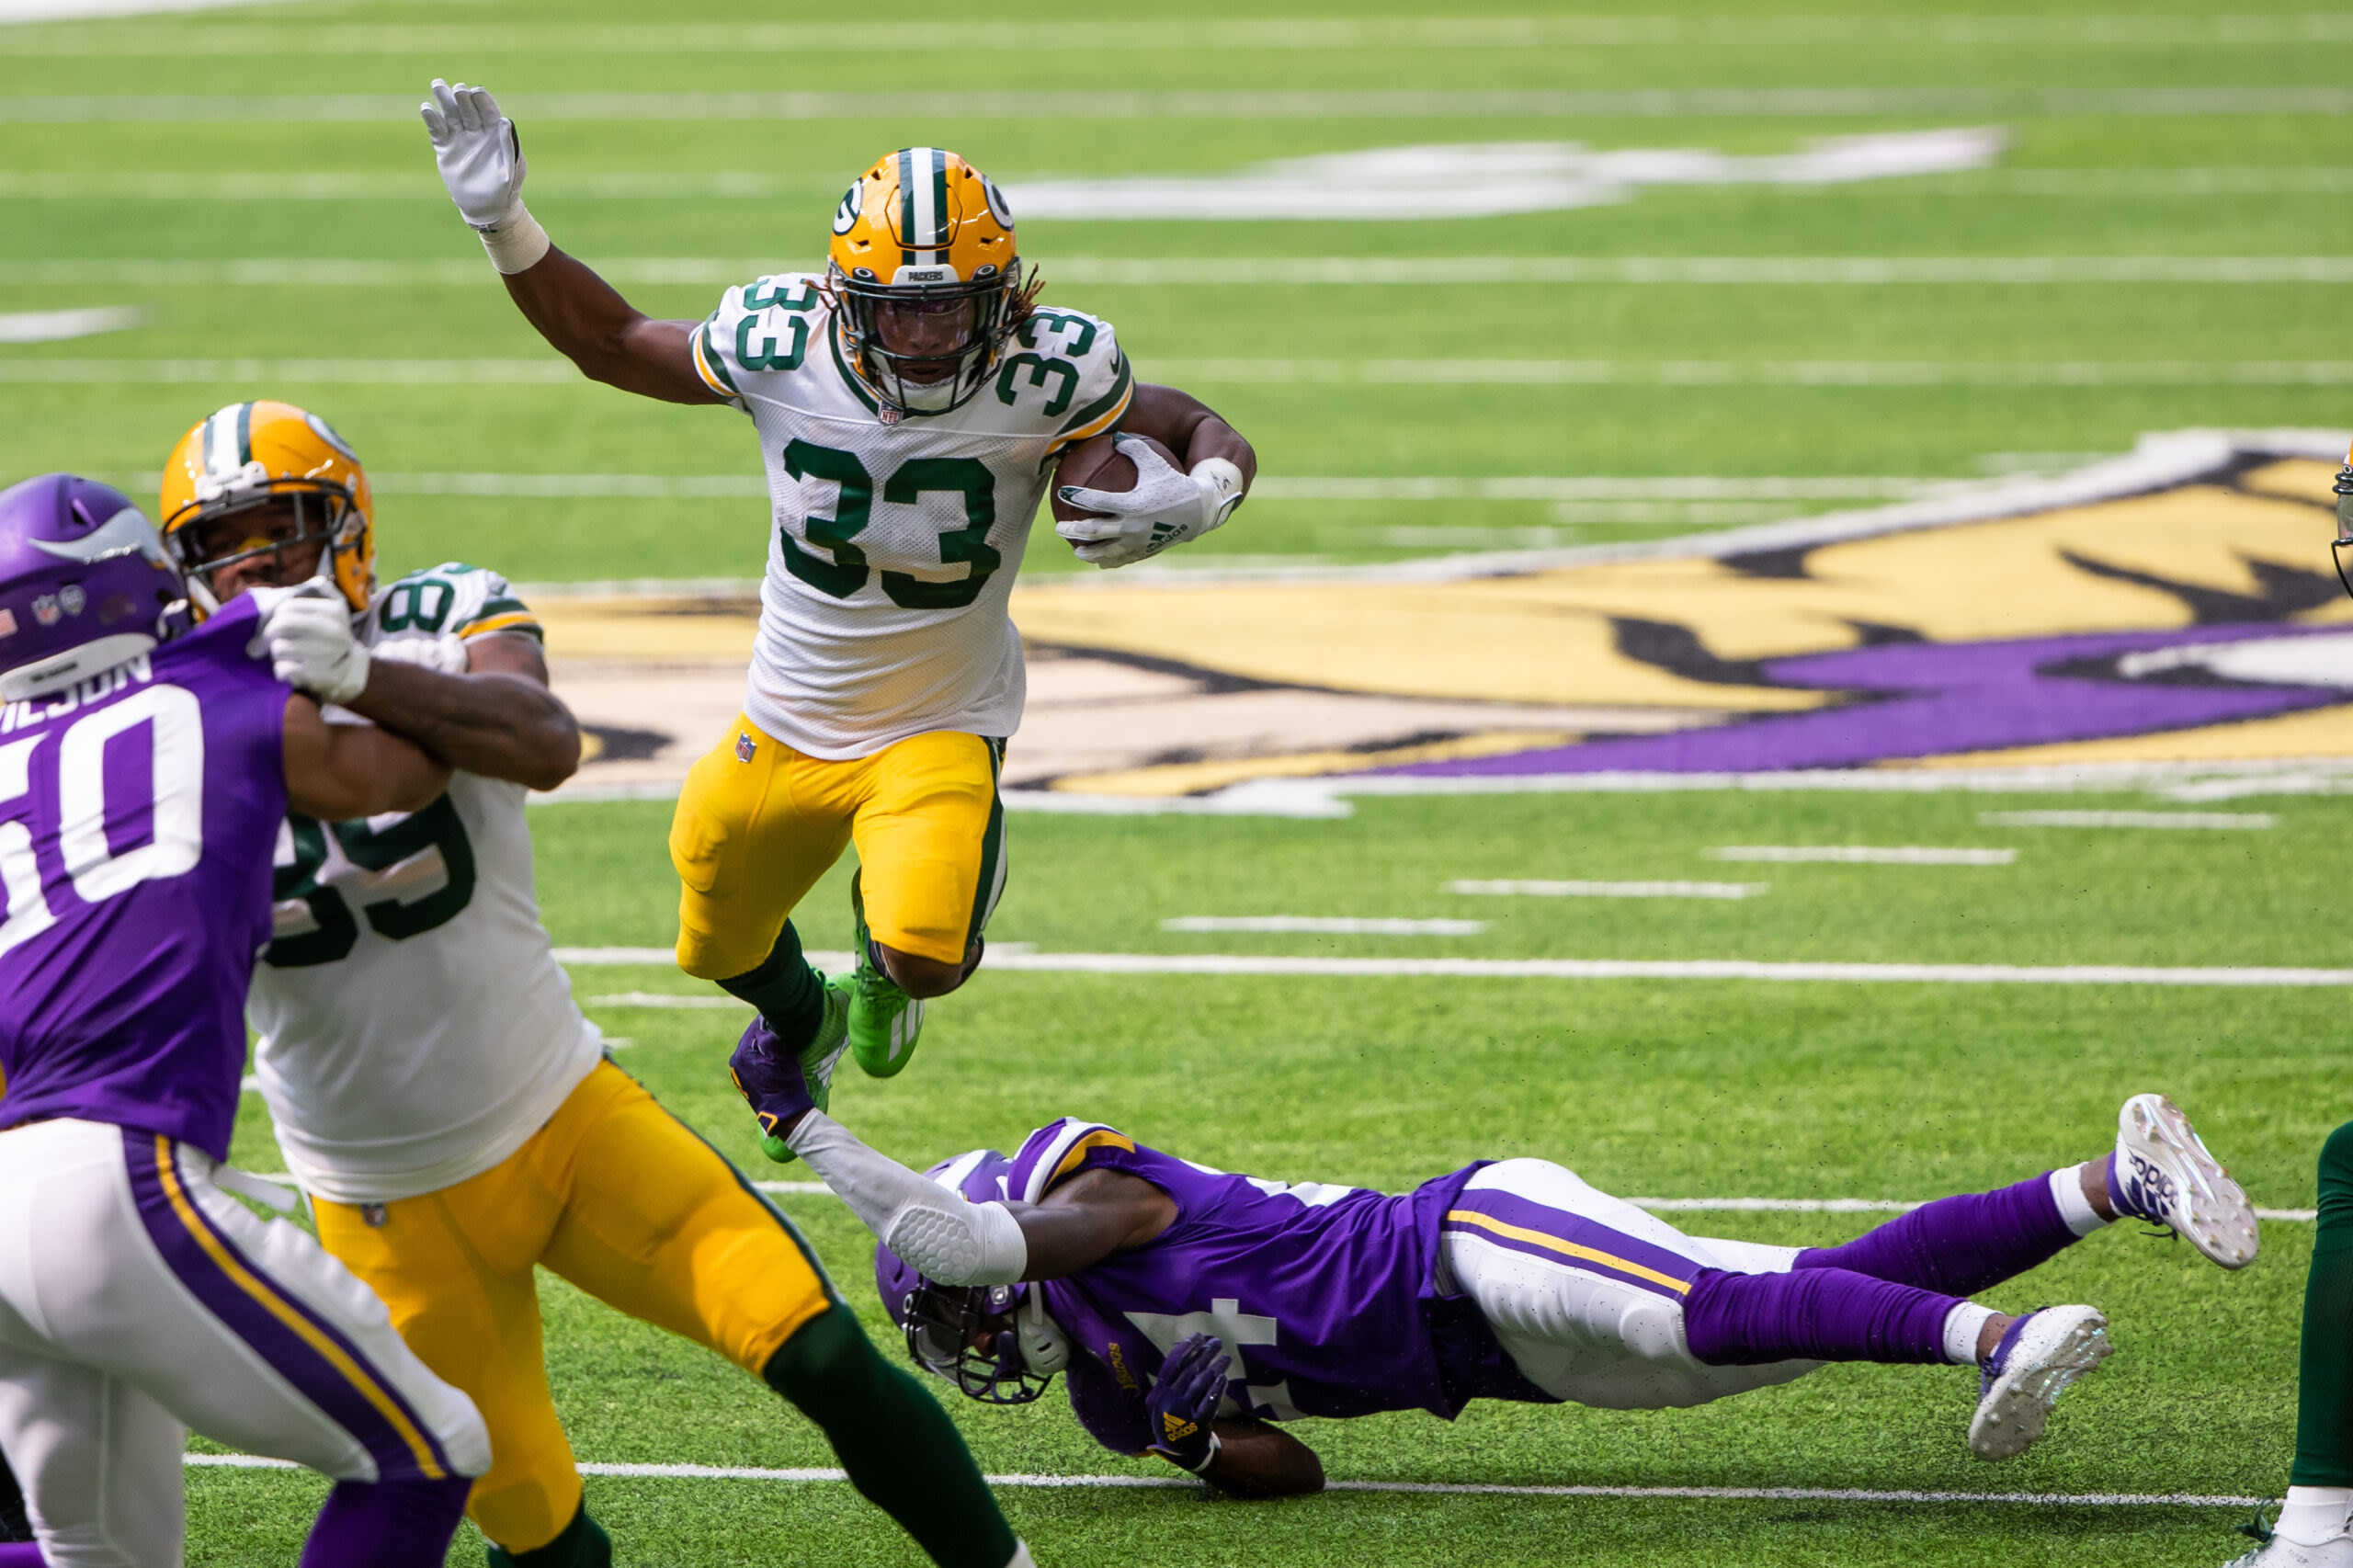 Sports Illustrated predicts Aaron Jones to be involved in passing game